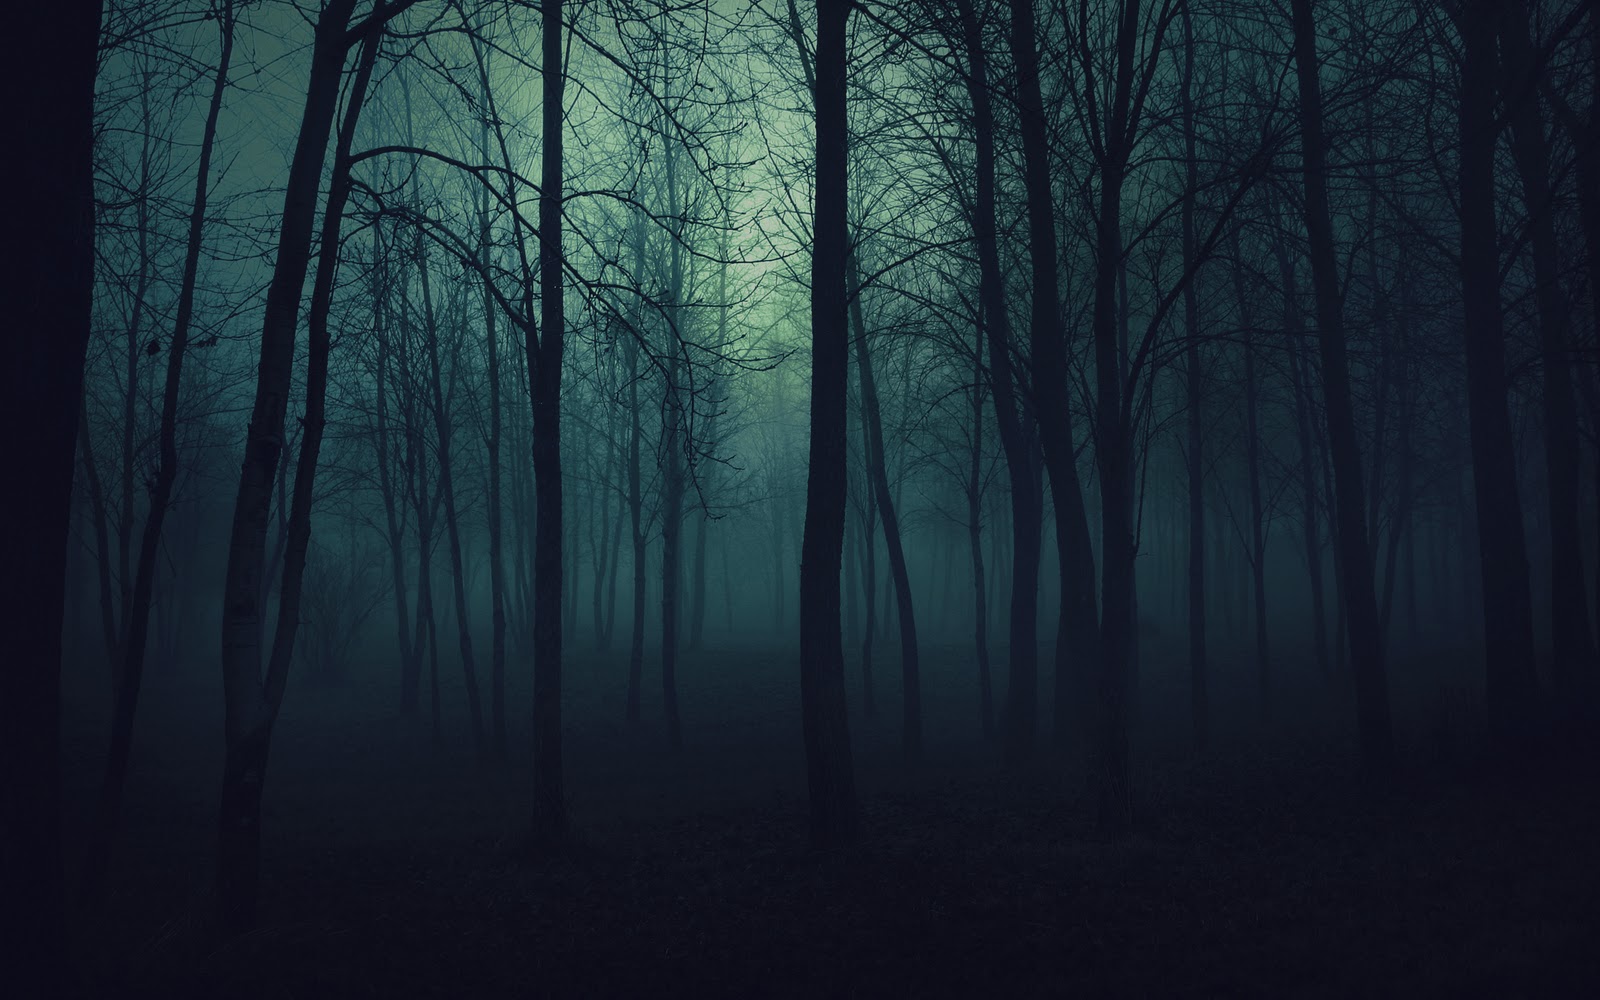 In A Creepy Night Autum Forrest Wallpaper